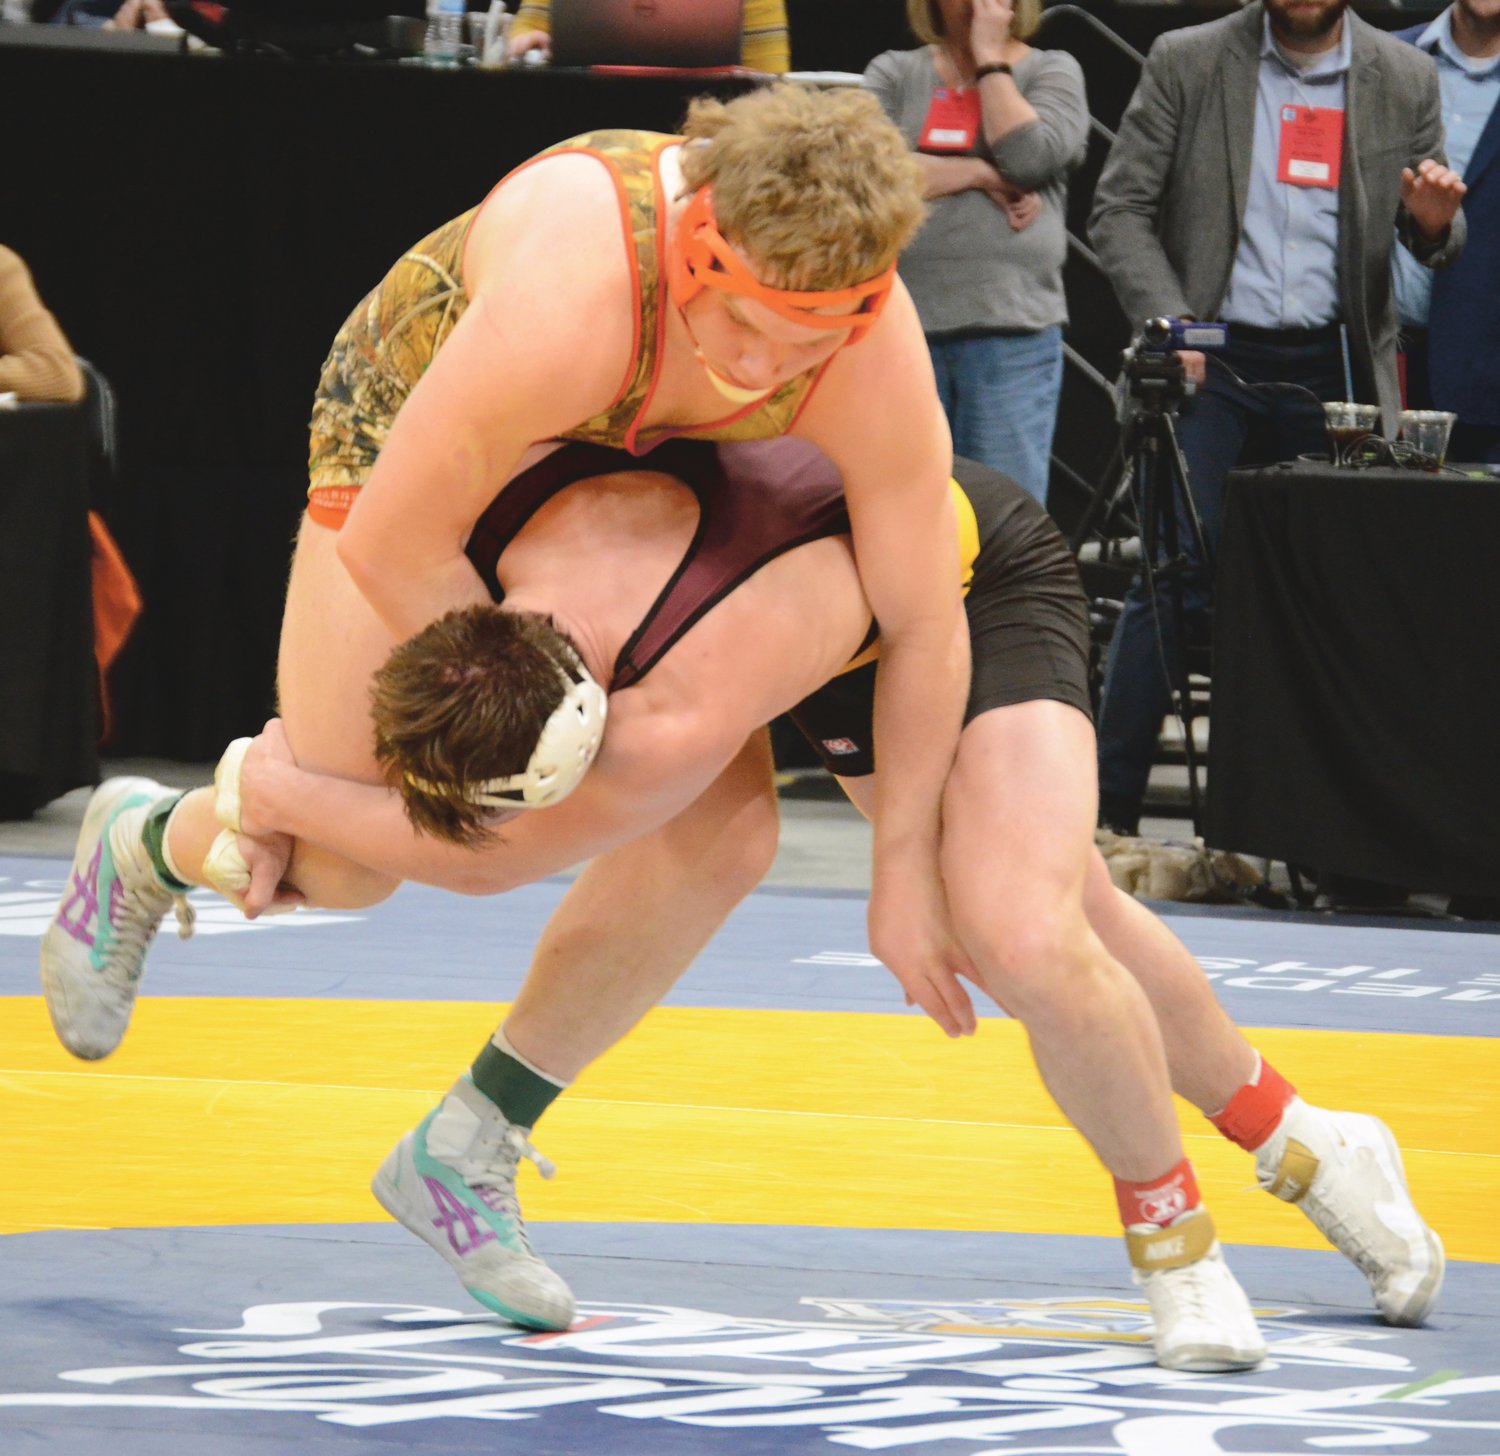 North Montgomery's Drew Webster lost to Chesterton's Evan Bates 6-5 in the state semi-finals.